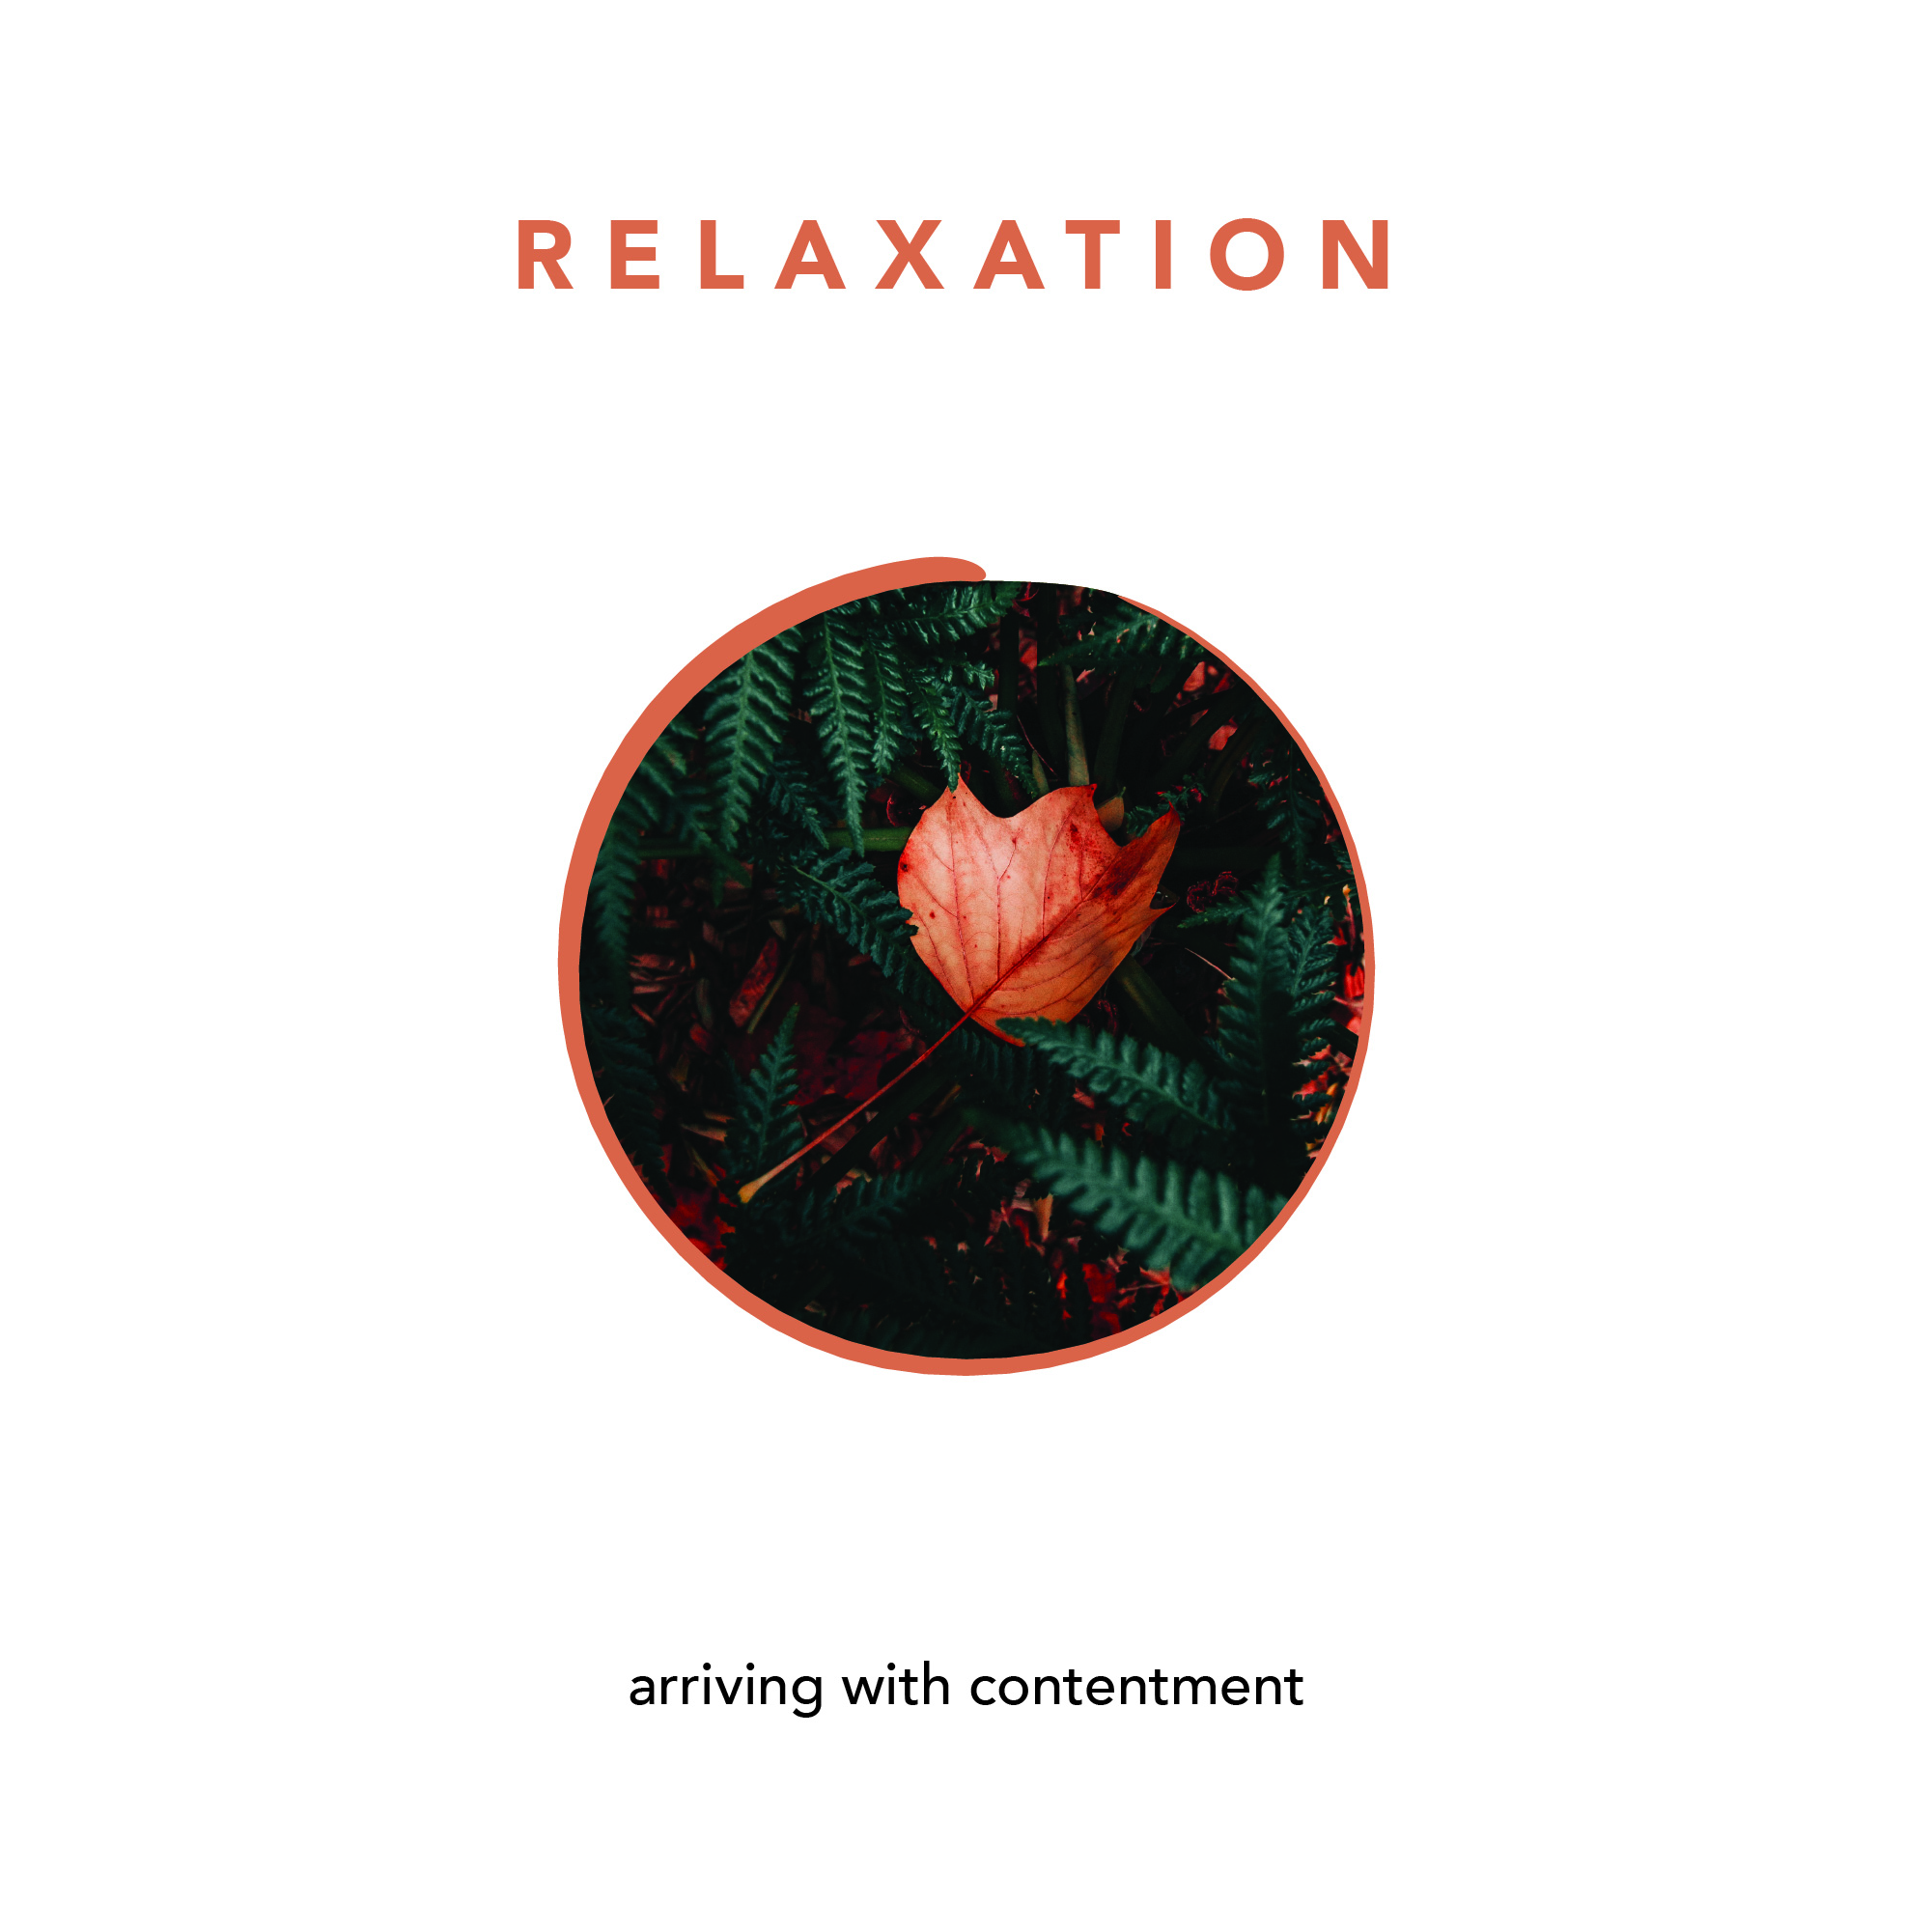 RELAXATION - being free of tension by resting with appreciation and satisfaction